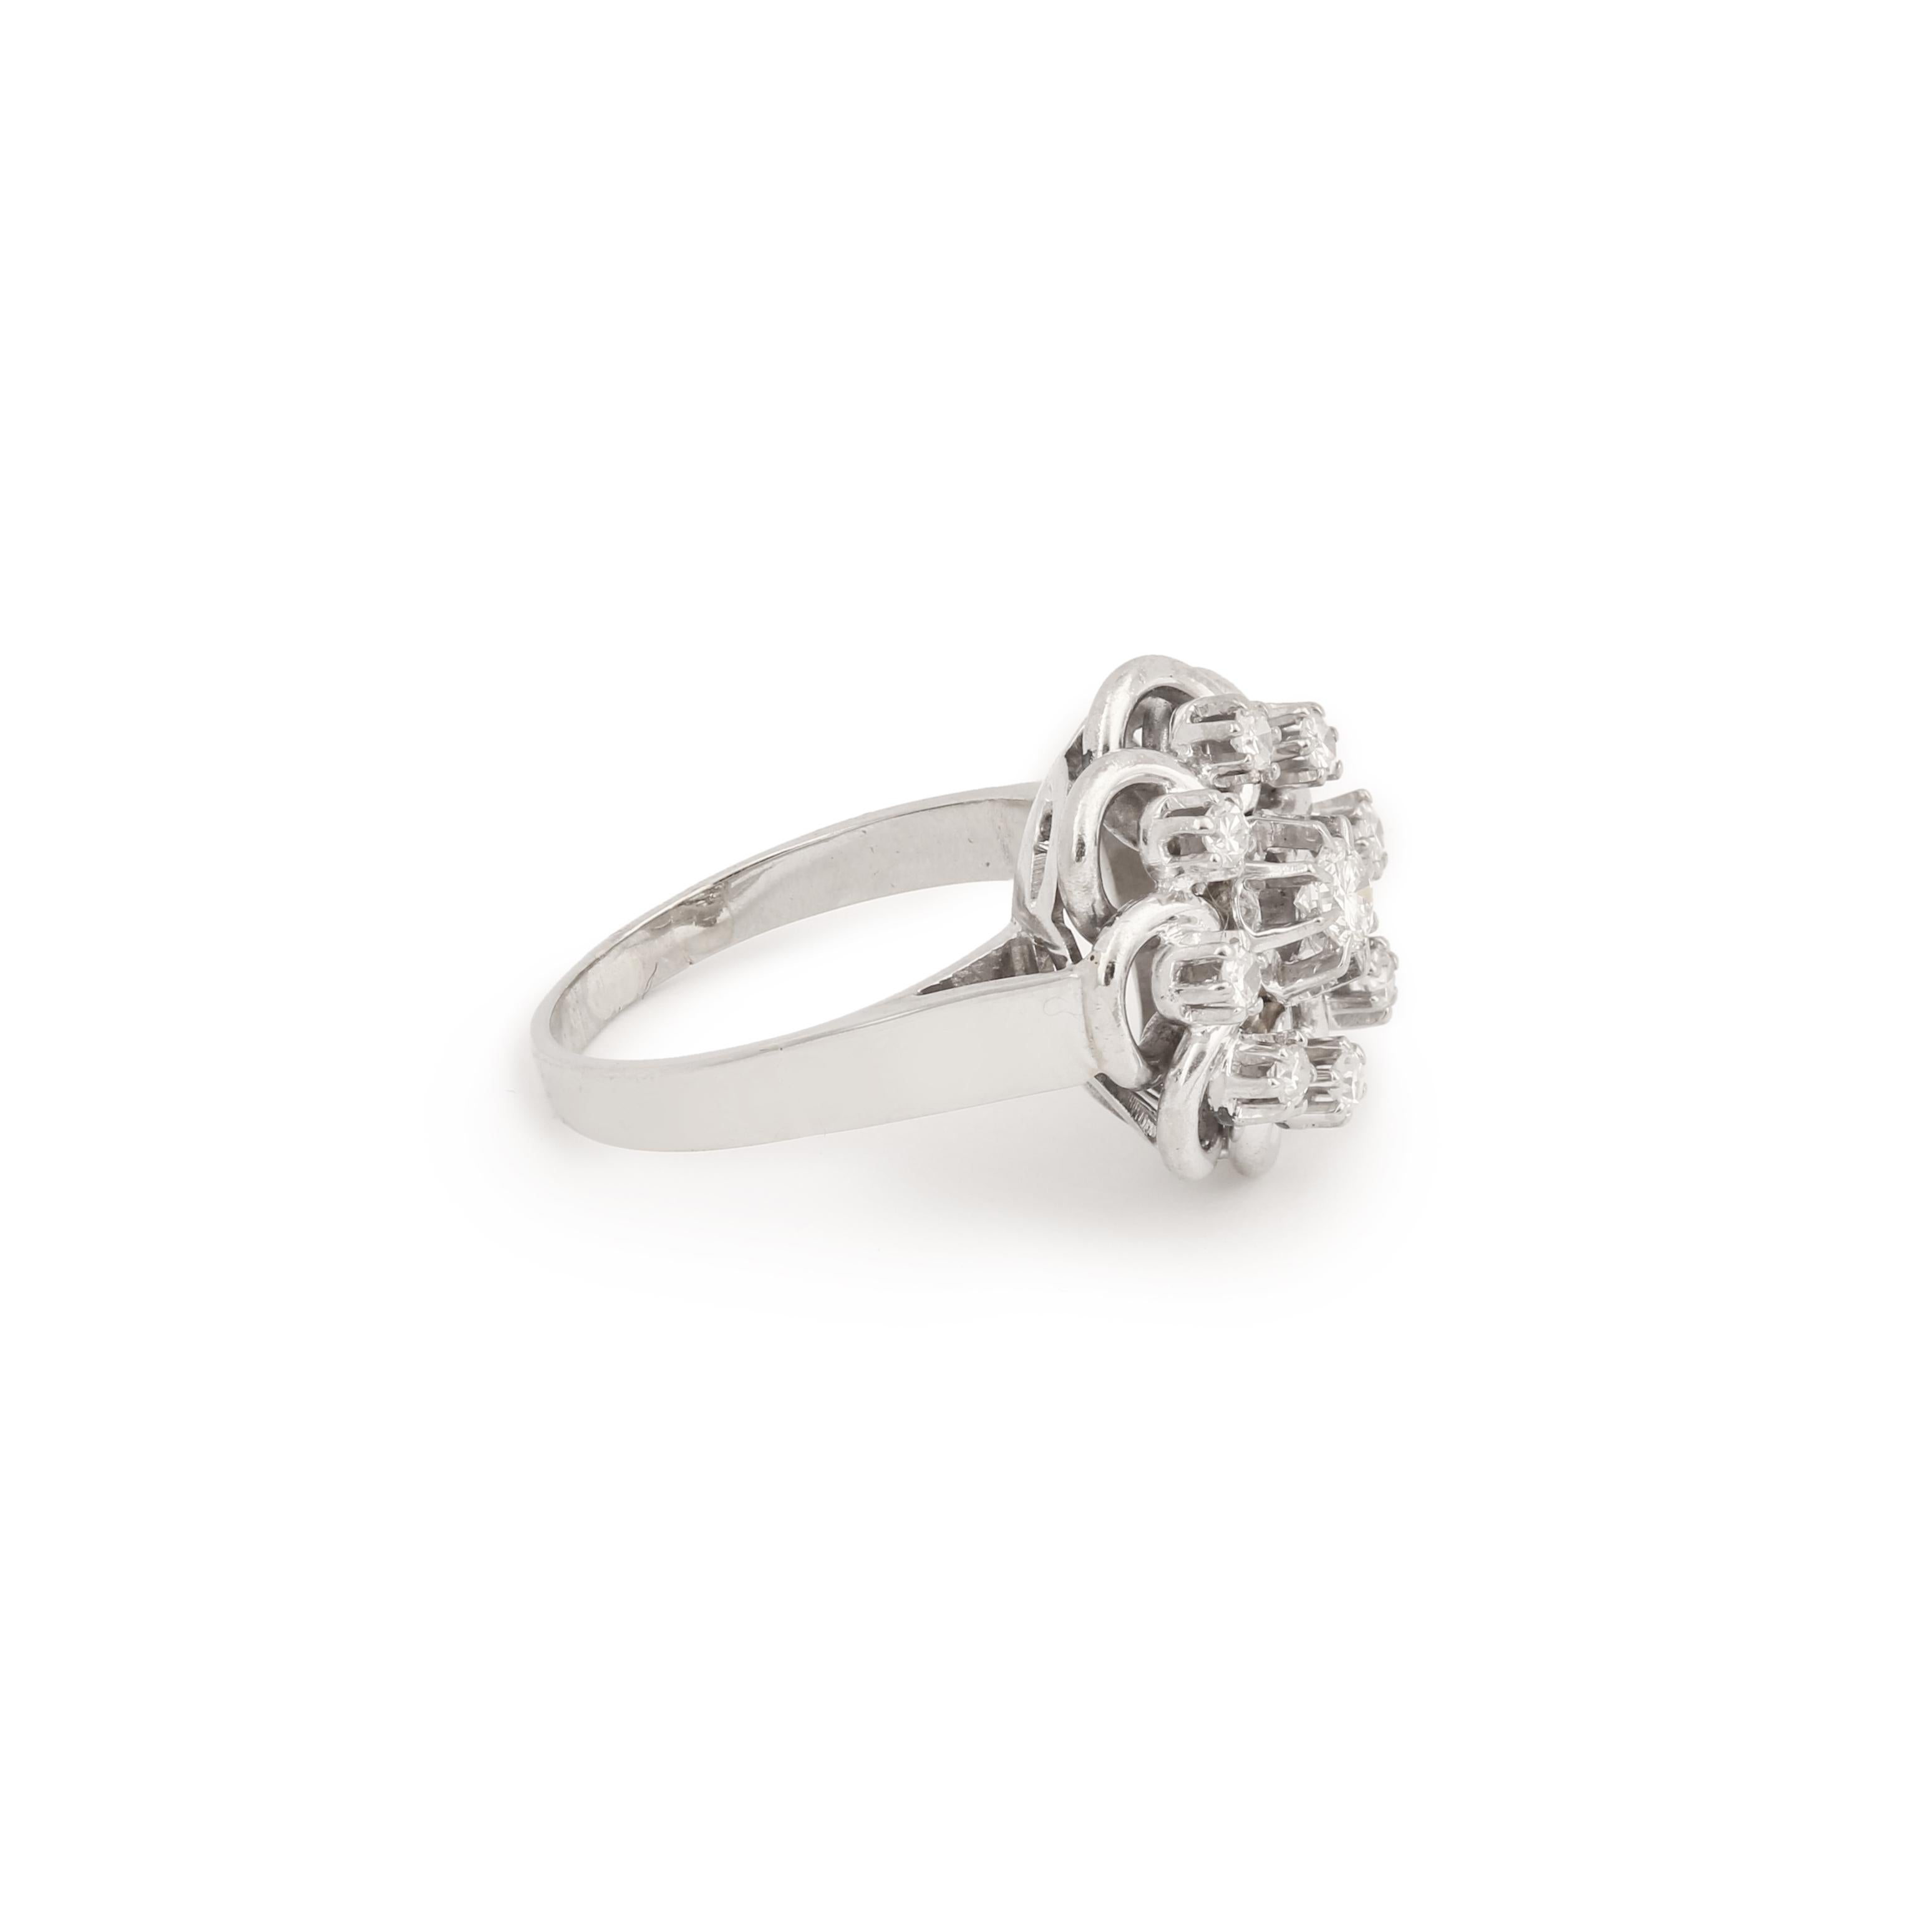 Magnificent daisy ring in white gold set with brillant cut diamonds.

The central diamond modern cut, the surrounding one, are old cut.

Estimated total weight of diamonds: 0.40 carats

Dimensions : 16 x 16 x 8.84 mm (0.630 x 0.630 x 0.348